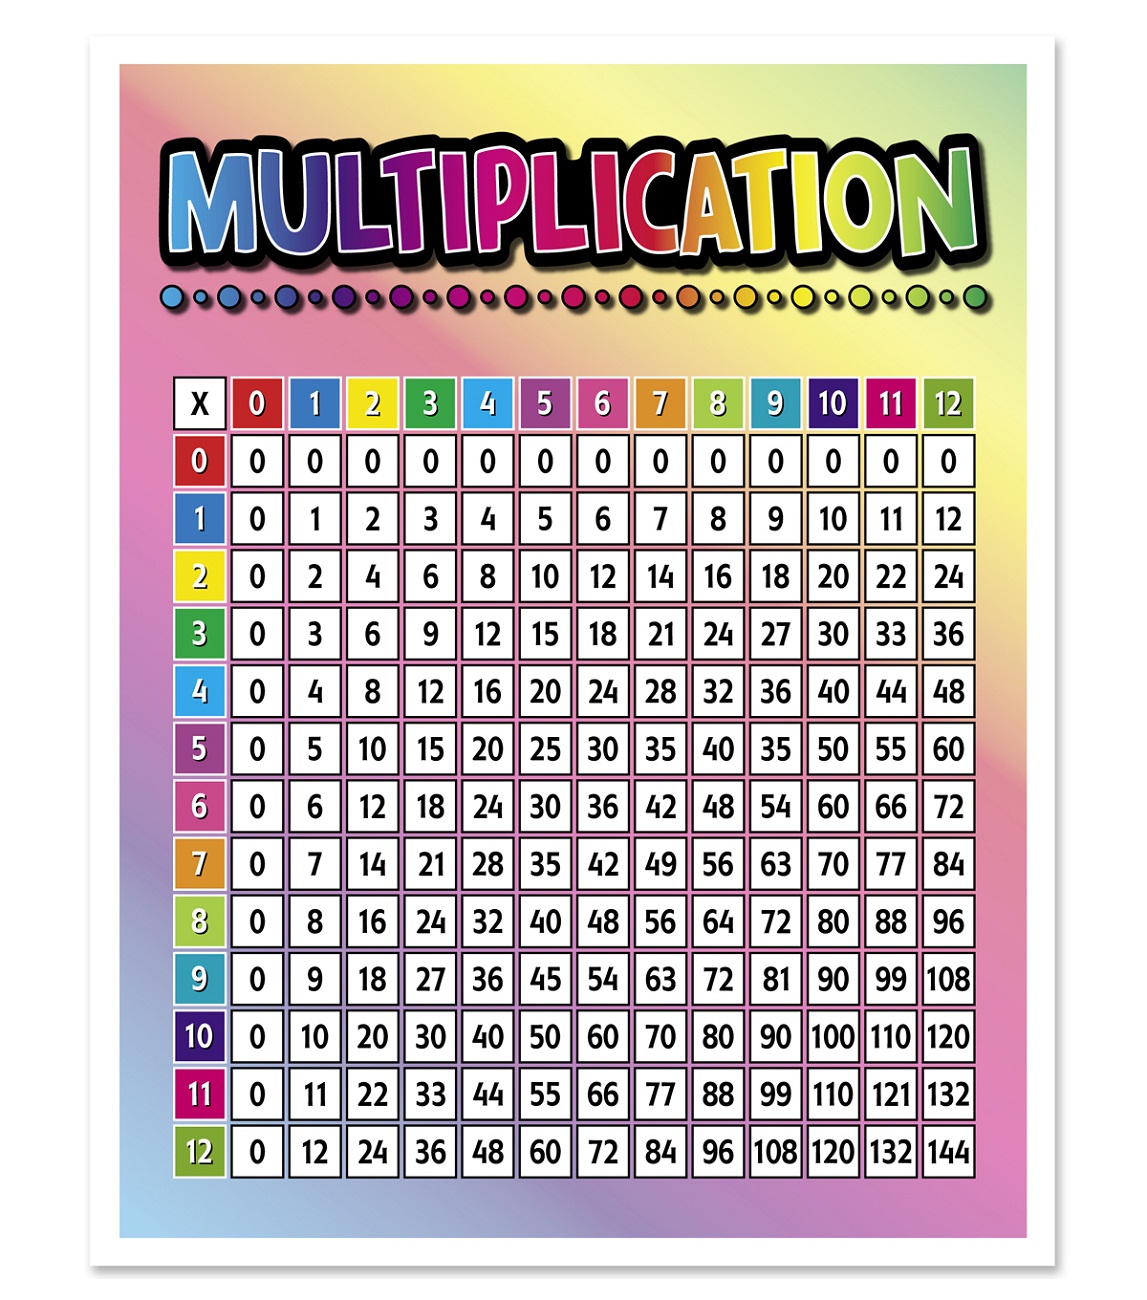 Large Multiplication Table to Train Memory | Activity Shelter